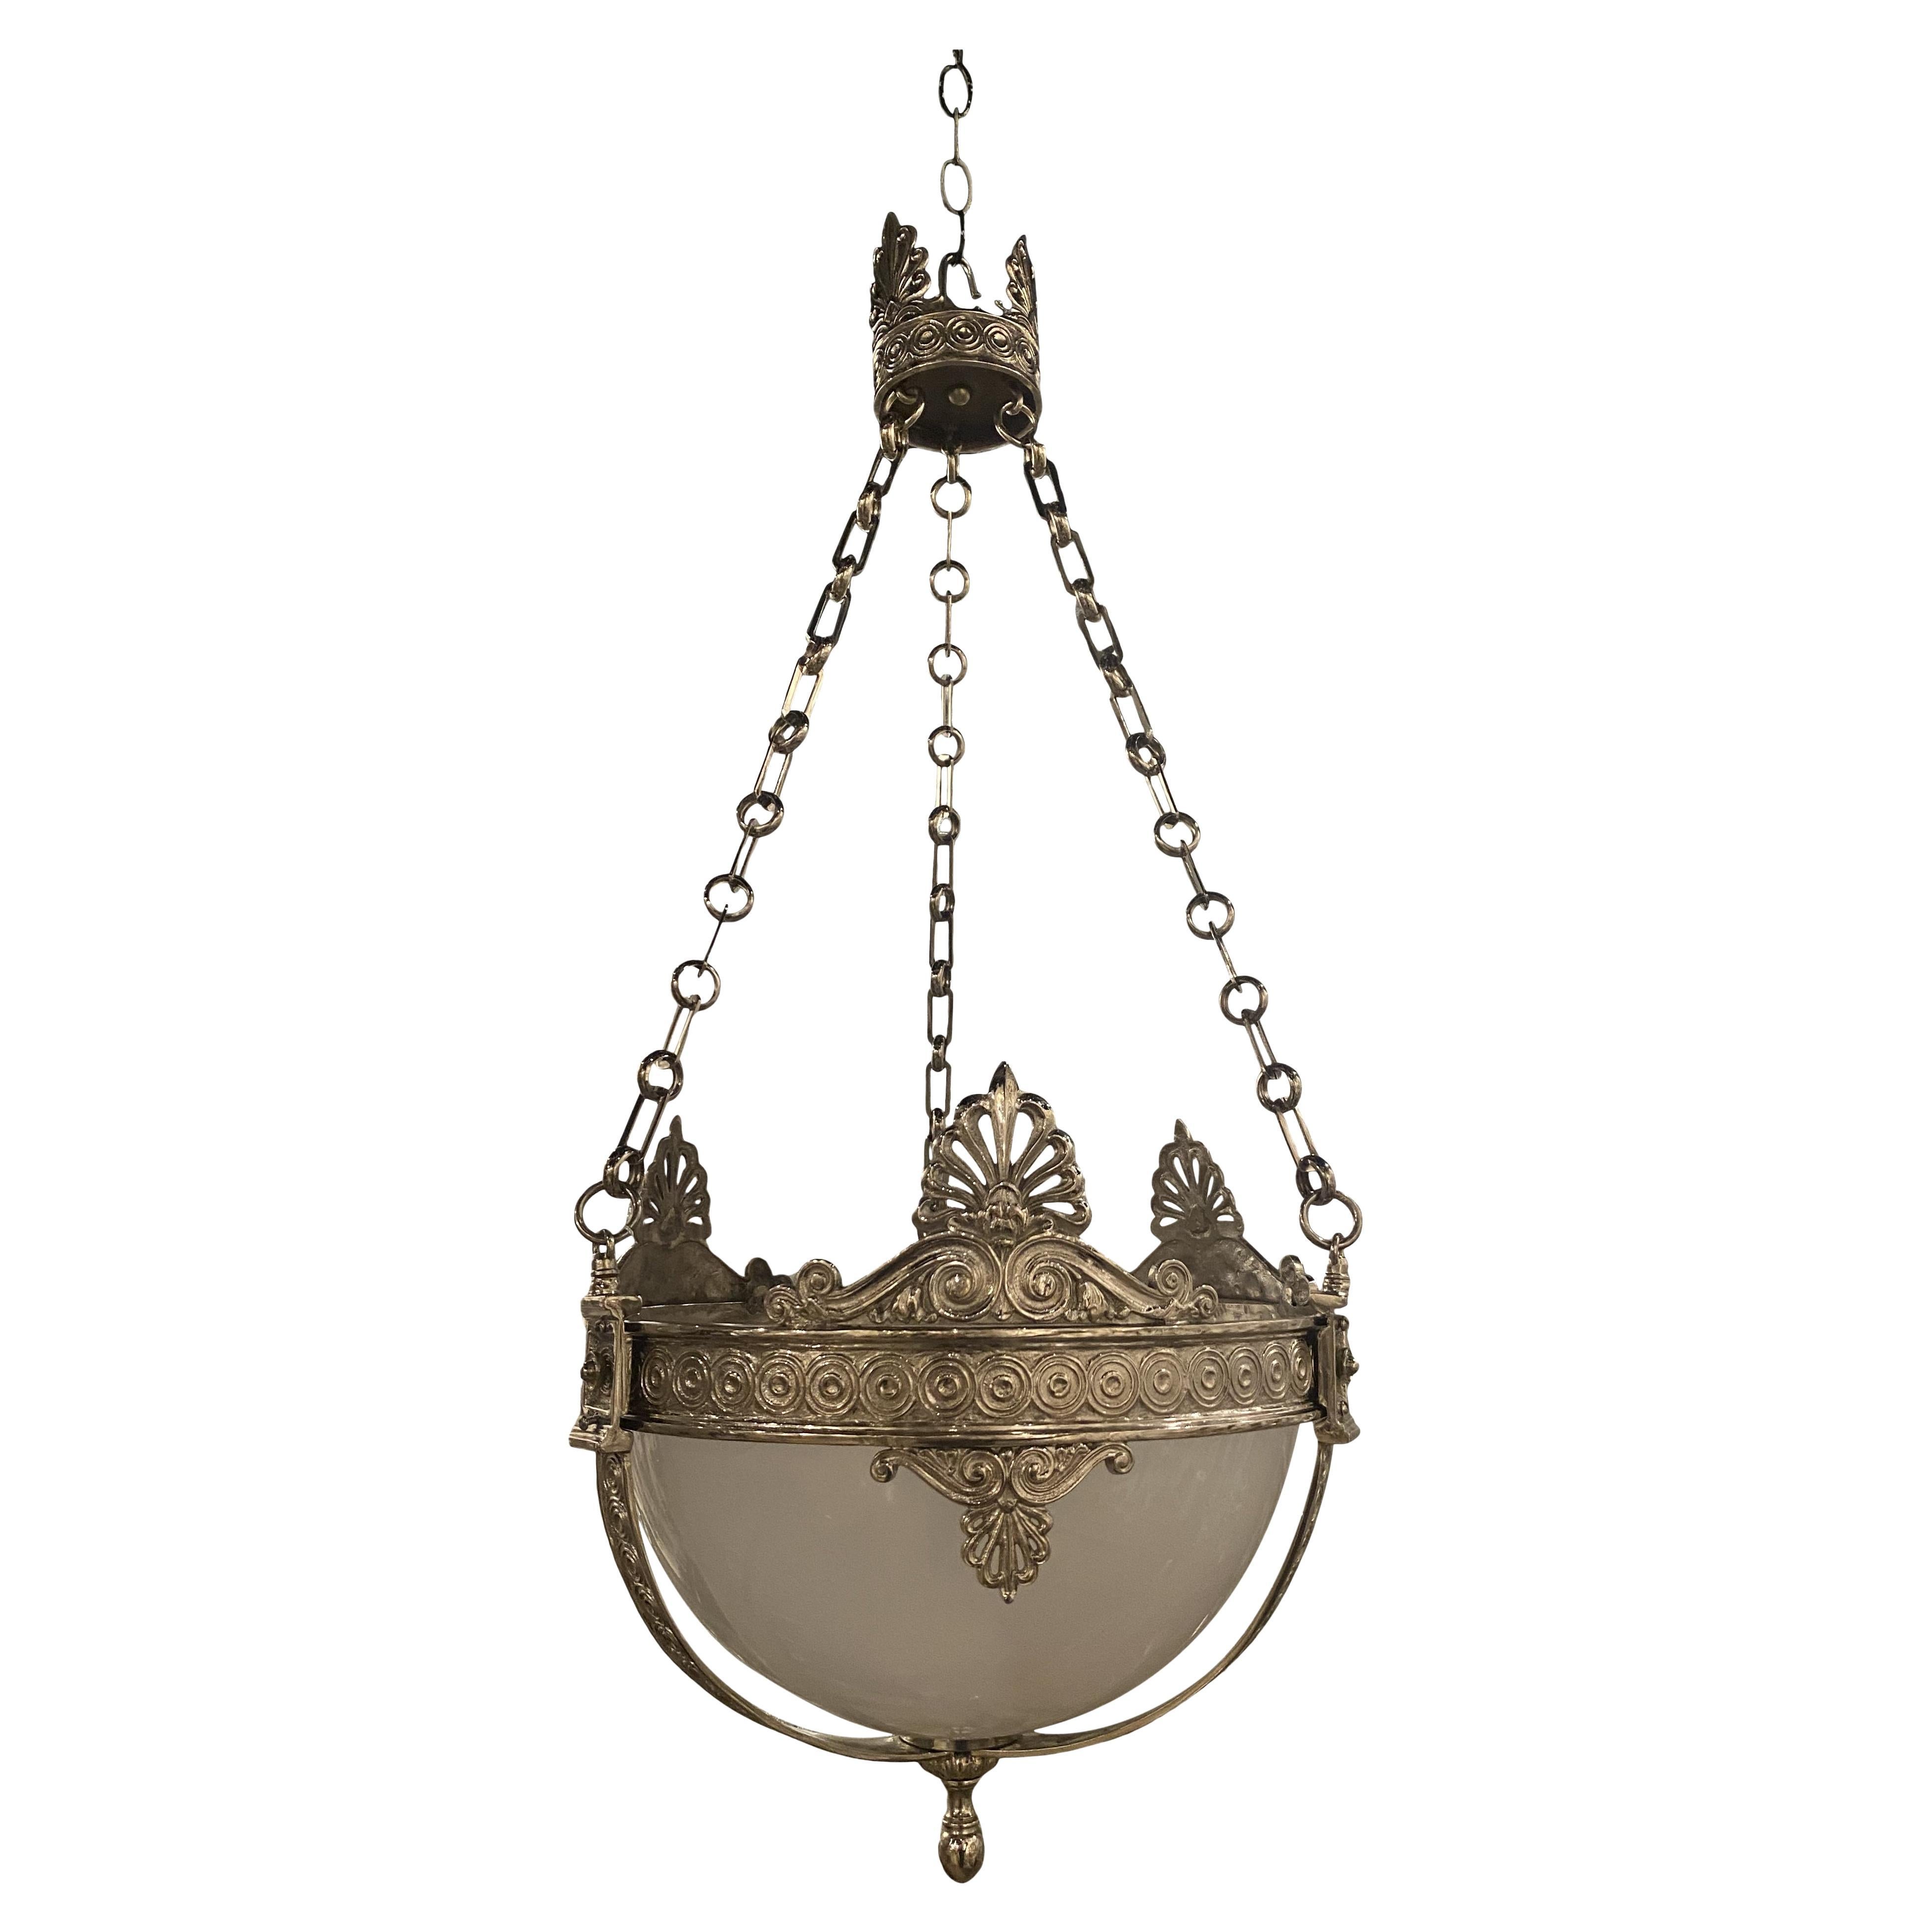 A circa 1920’s silver plate light fixture neoclassic style with Opaline glass inset and three lights